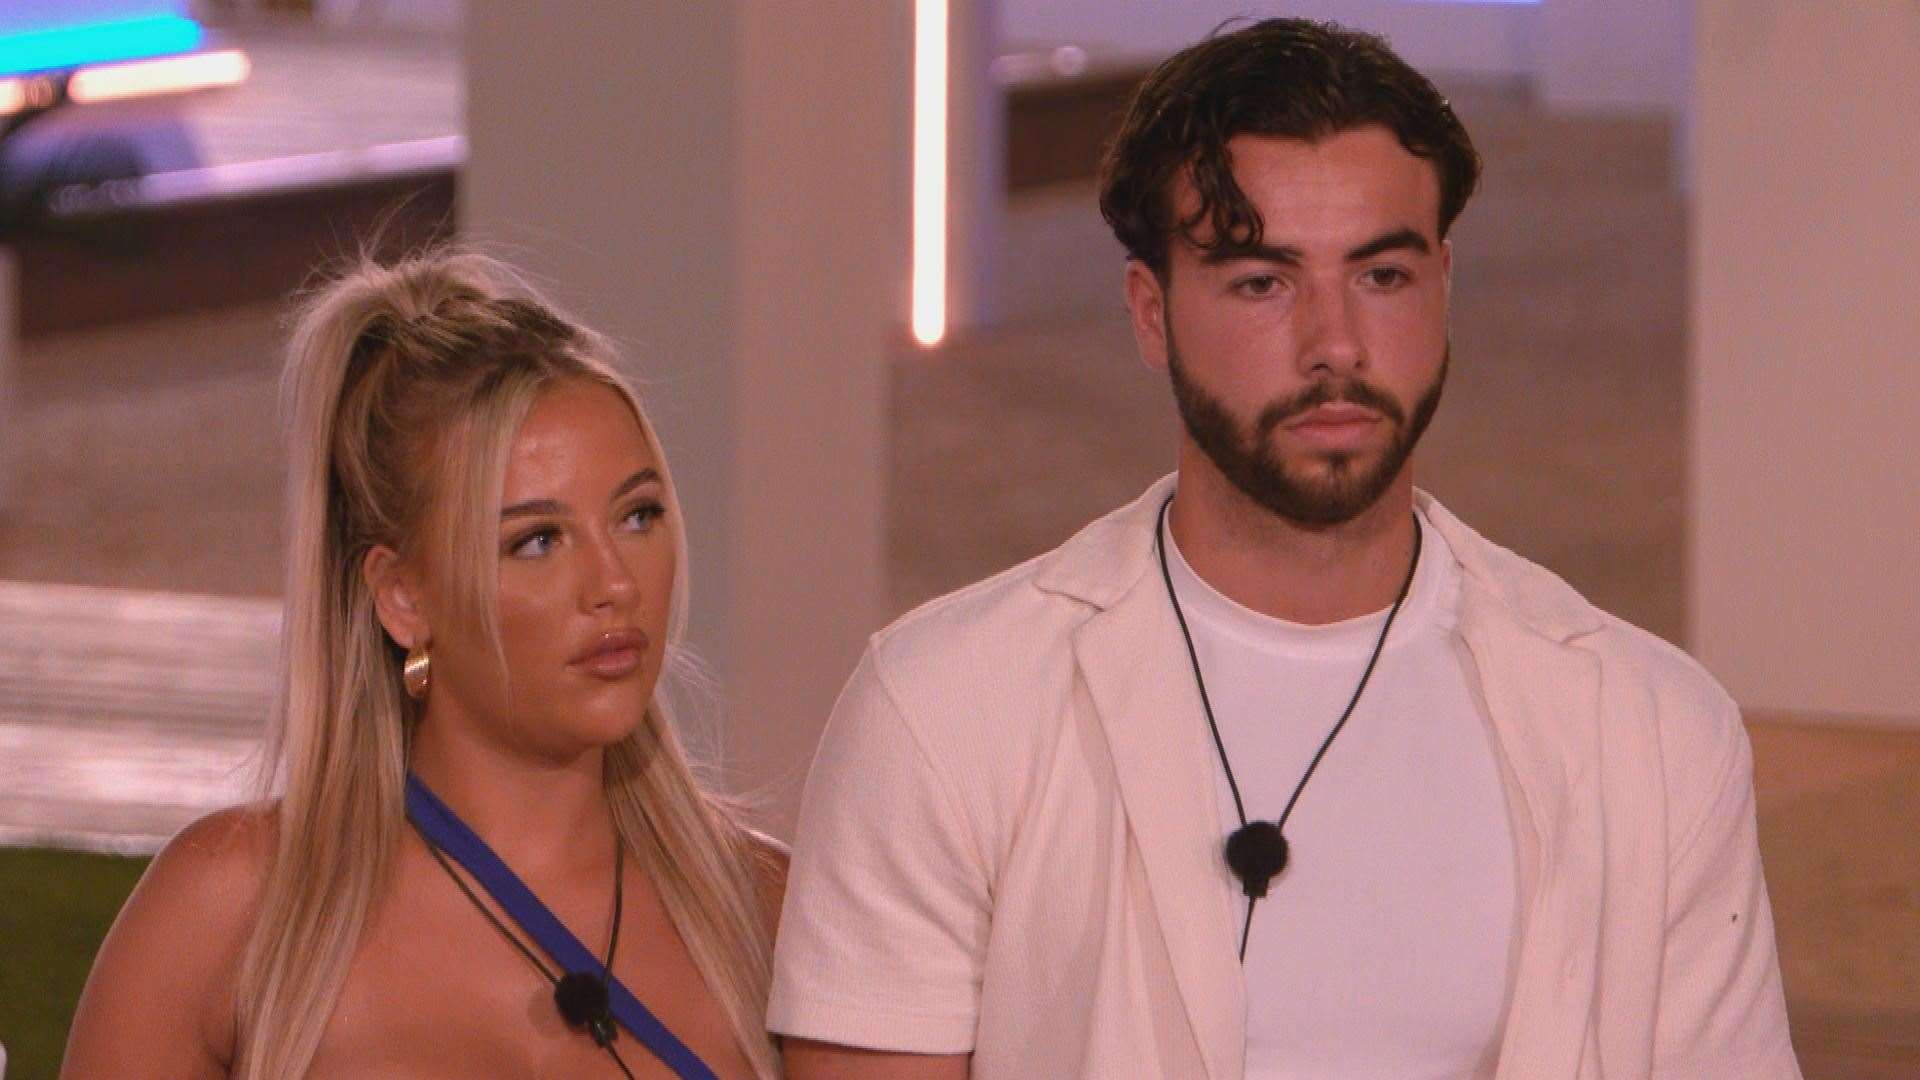 Jess Harding and Sammy Root have split after winning Love Island. Picture: ITV